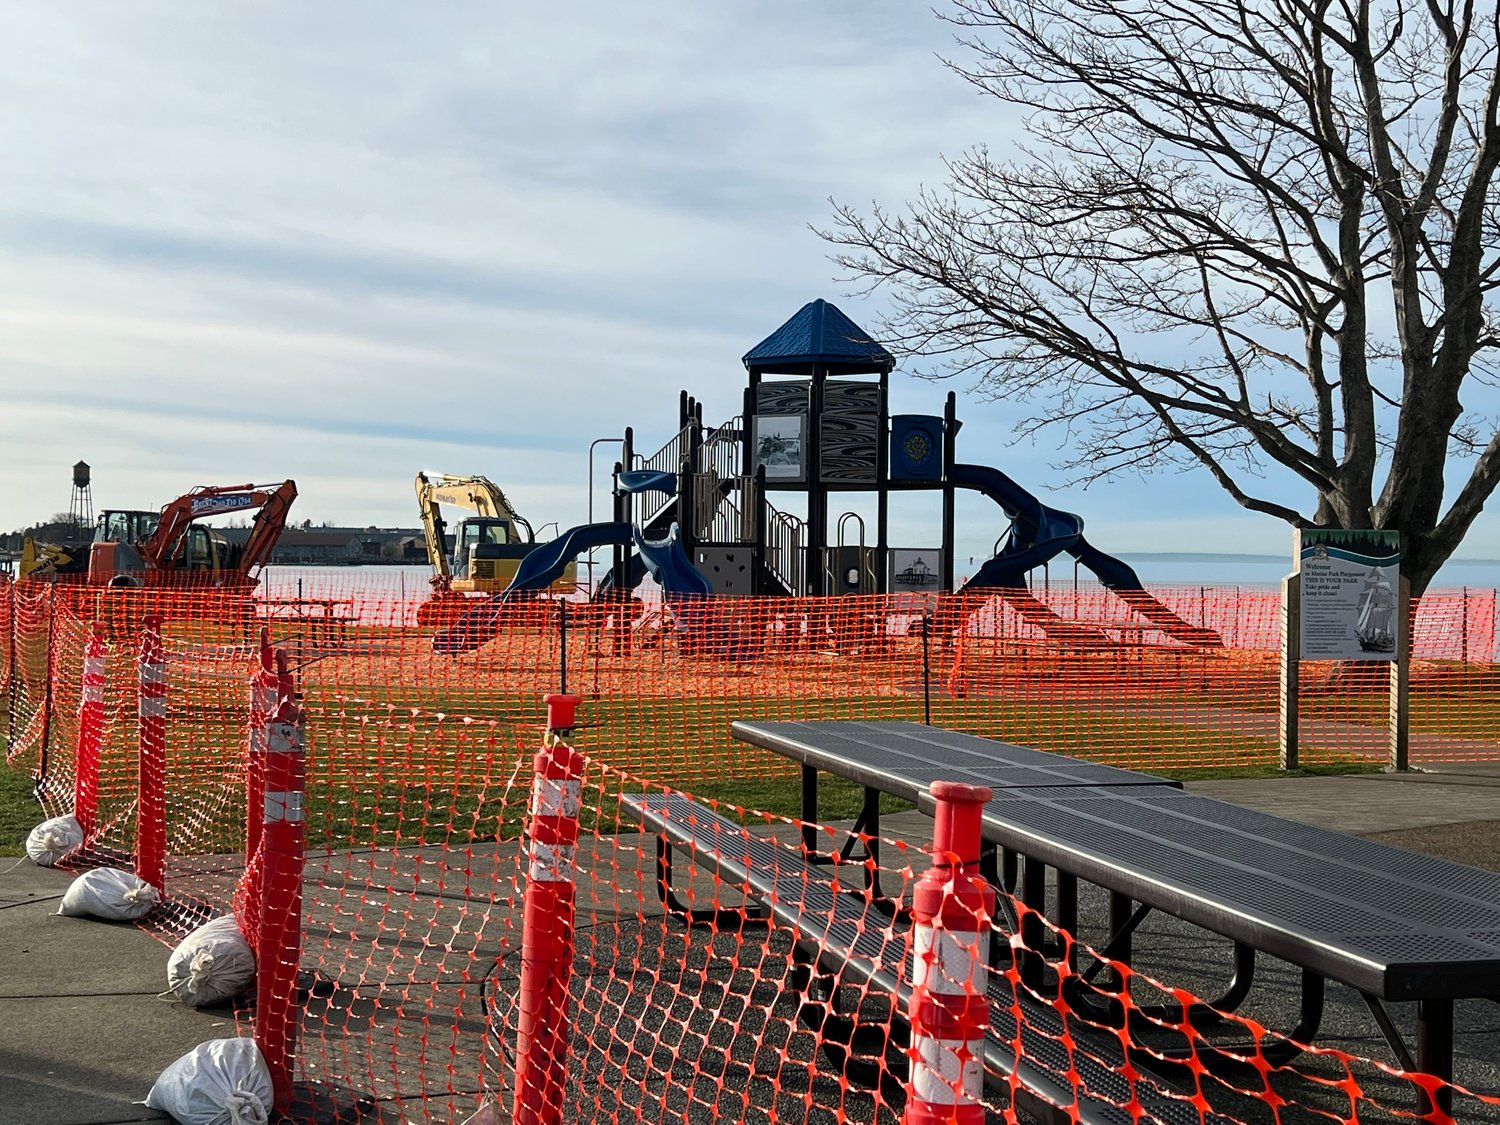 The Blaine Marine Park shoreline will be under construction near the playground area until mid-February as the city of Blaine finishes its decade-long Marine Park Reconstruction Project. The playground will be closed until Wednesday, February 15. The project’s second phase will repair the remaining shoreline and add two pocket beaches near the Lighthouse Point Water Reclamation Facility this fall.